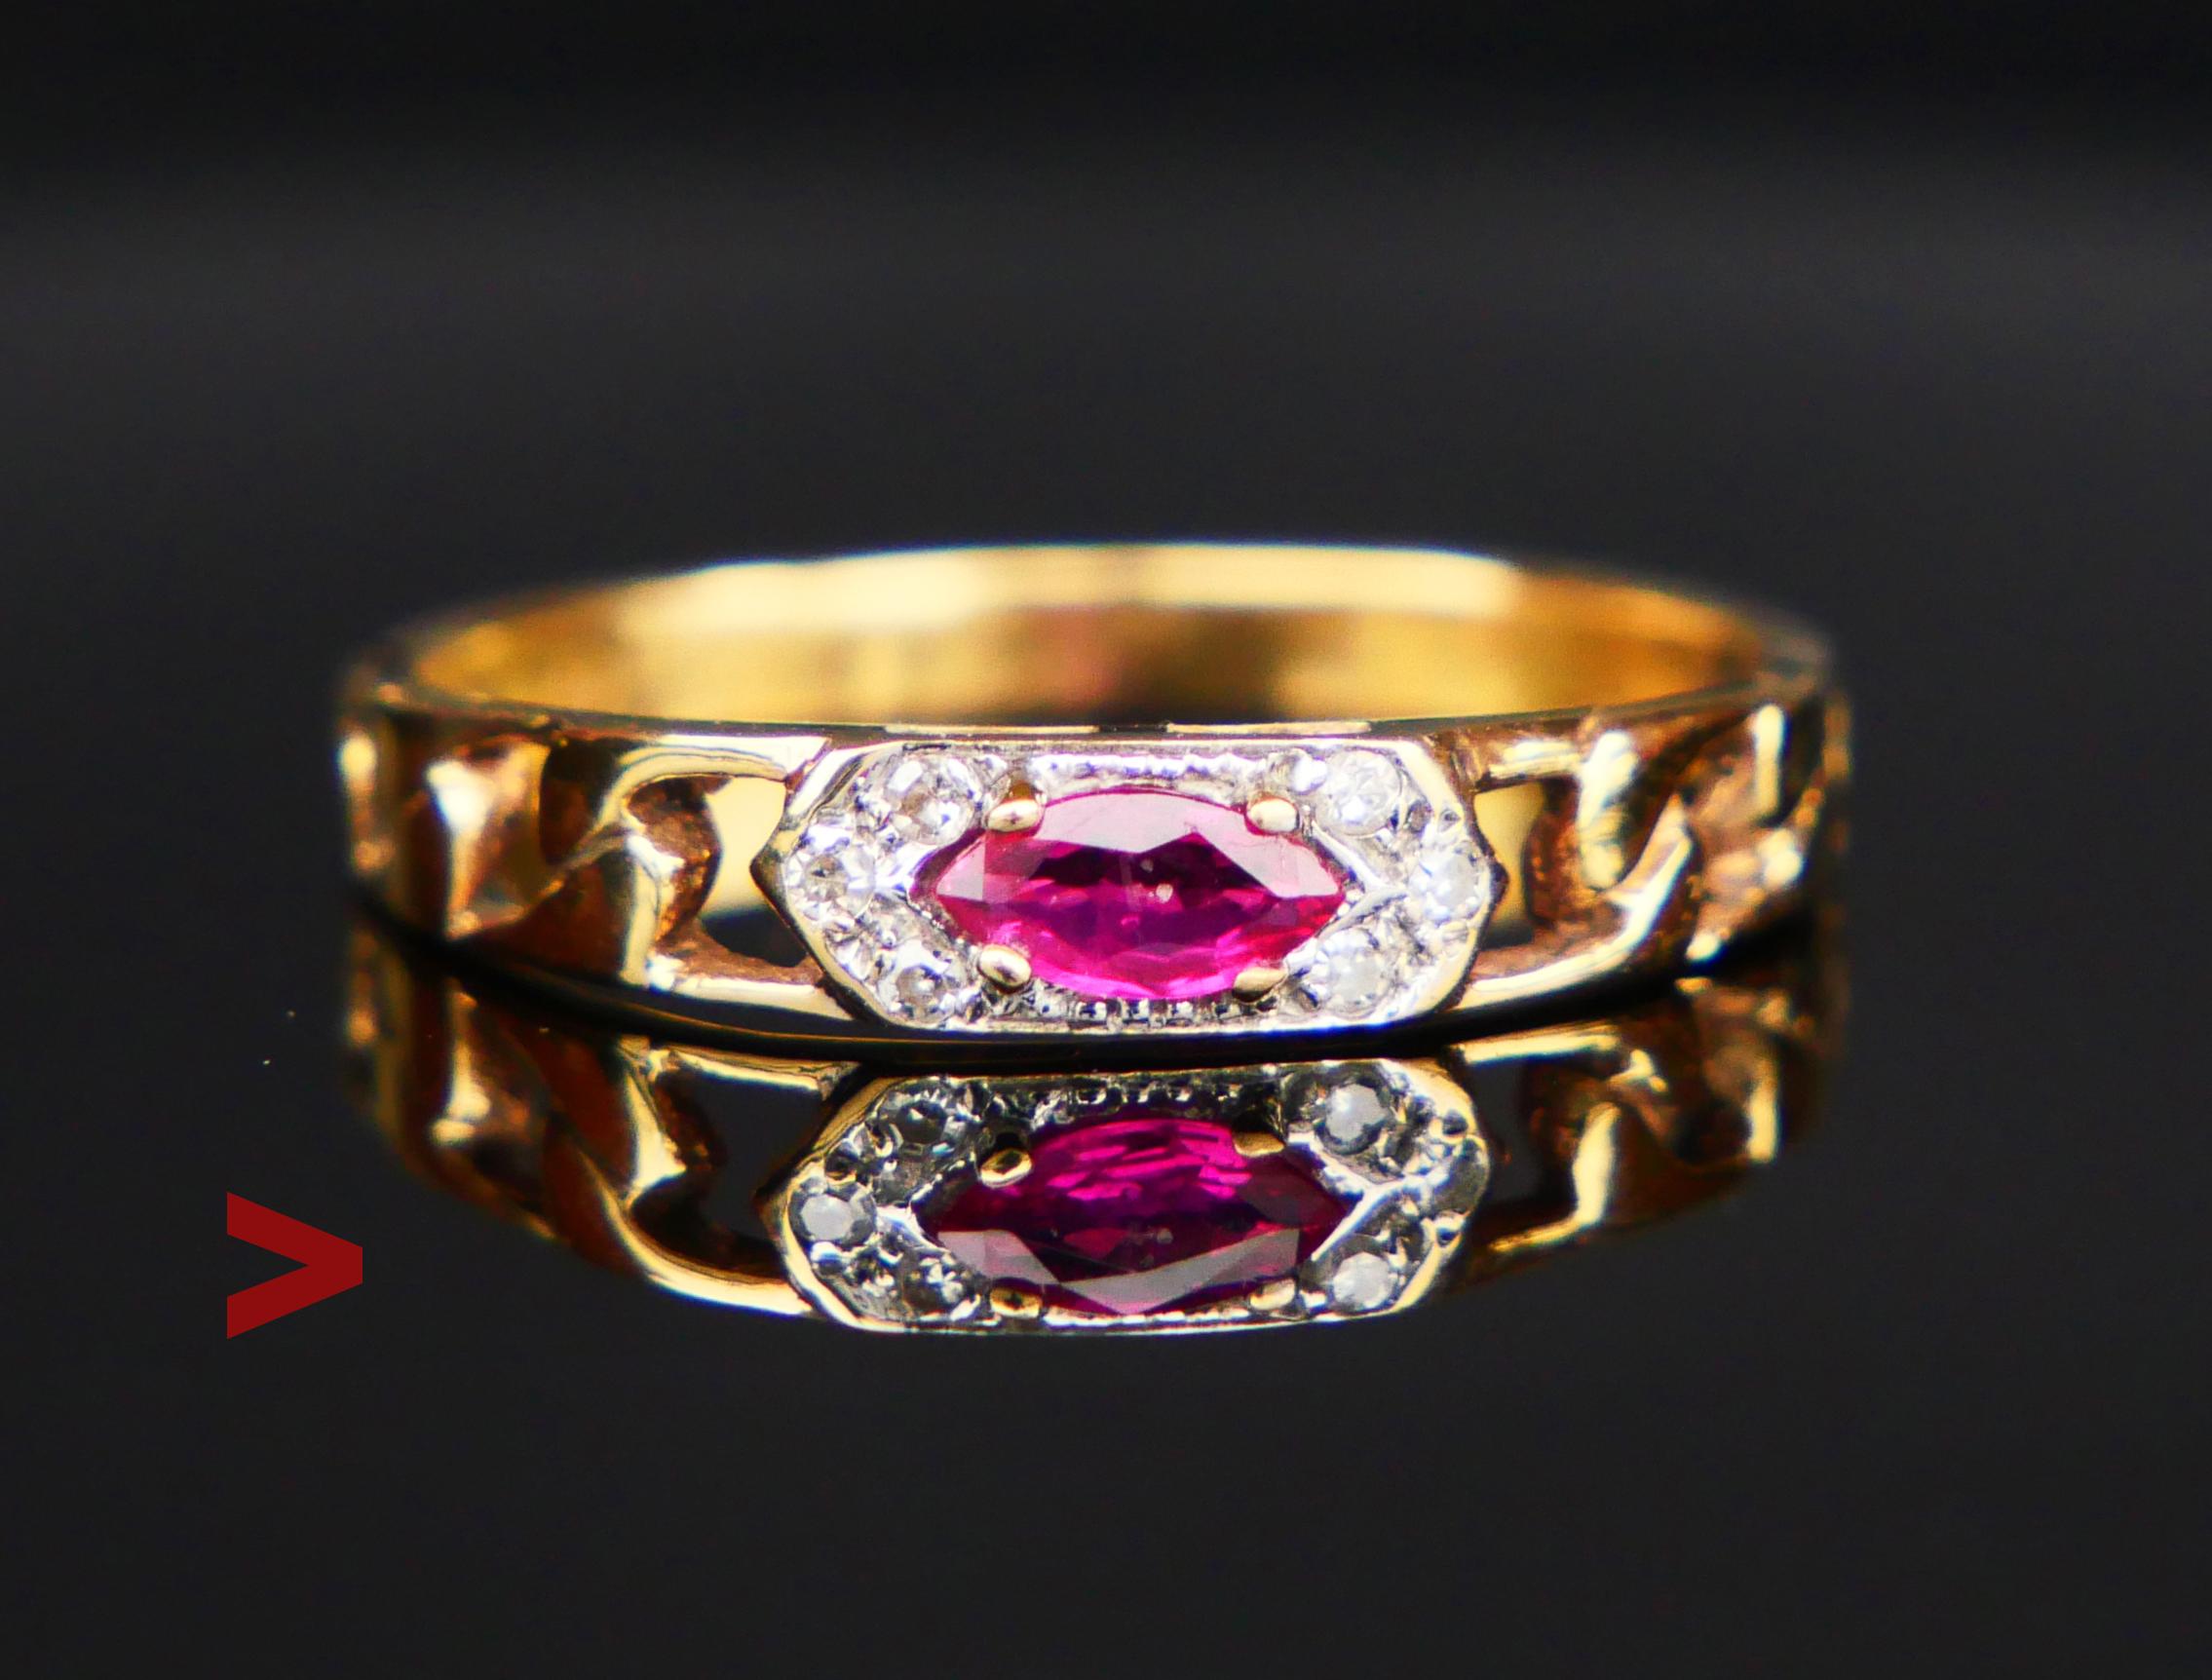 All Seeing Eye Ring with chained shoulders featuring fancy Marquise cut natural Ruby 5.5mm x 2.75 mm /ca 0.2ct and Six eight- cut Diamonds Ø 1mm /0.005ct each, all enclosed inside a six-pointed cluster in White Gold or Platinum. In finest used